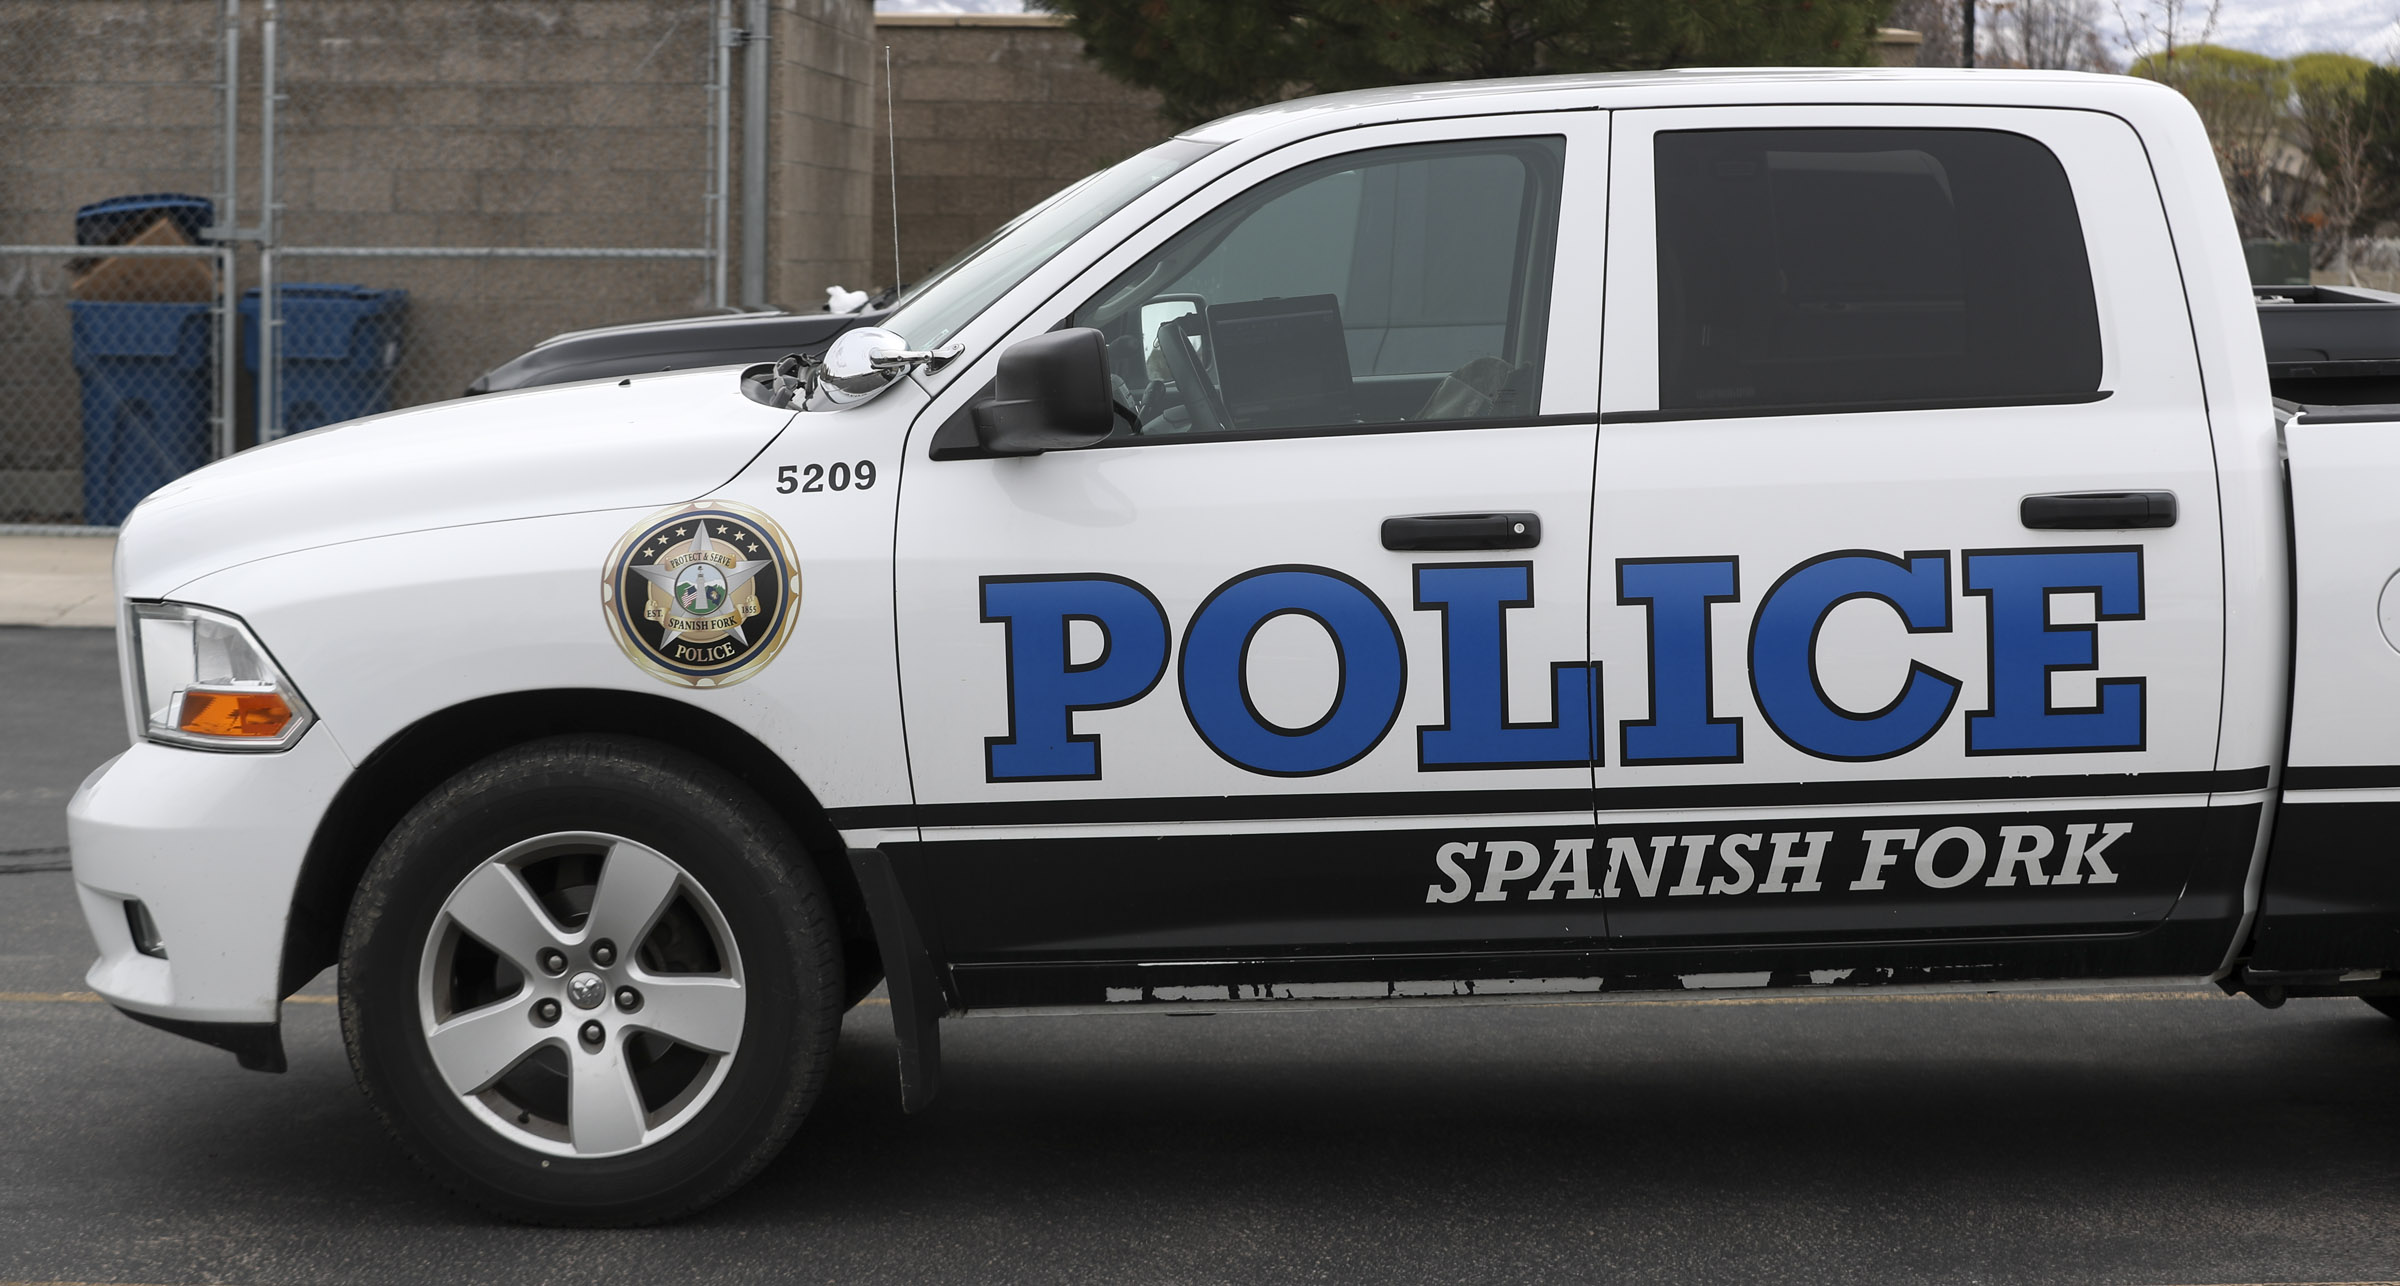 A Spanish Fork police vehicle is pictured on Monday, March 22, 2021. (Steve Griffin, Deseret News)...